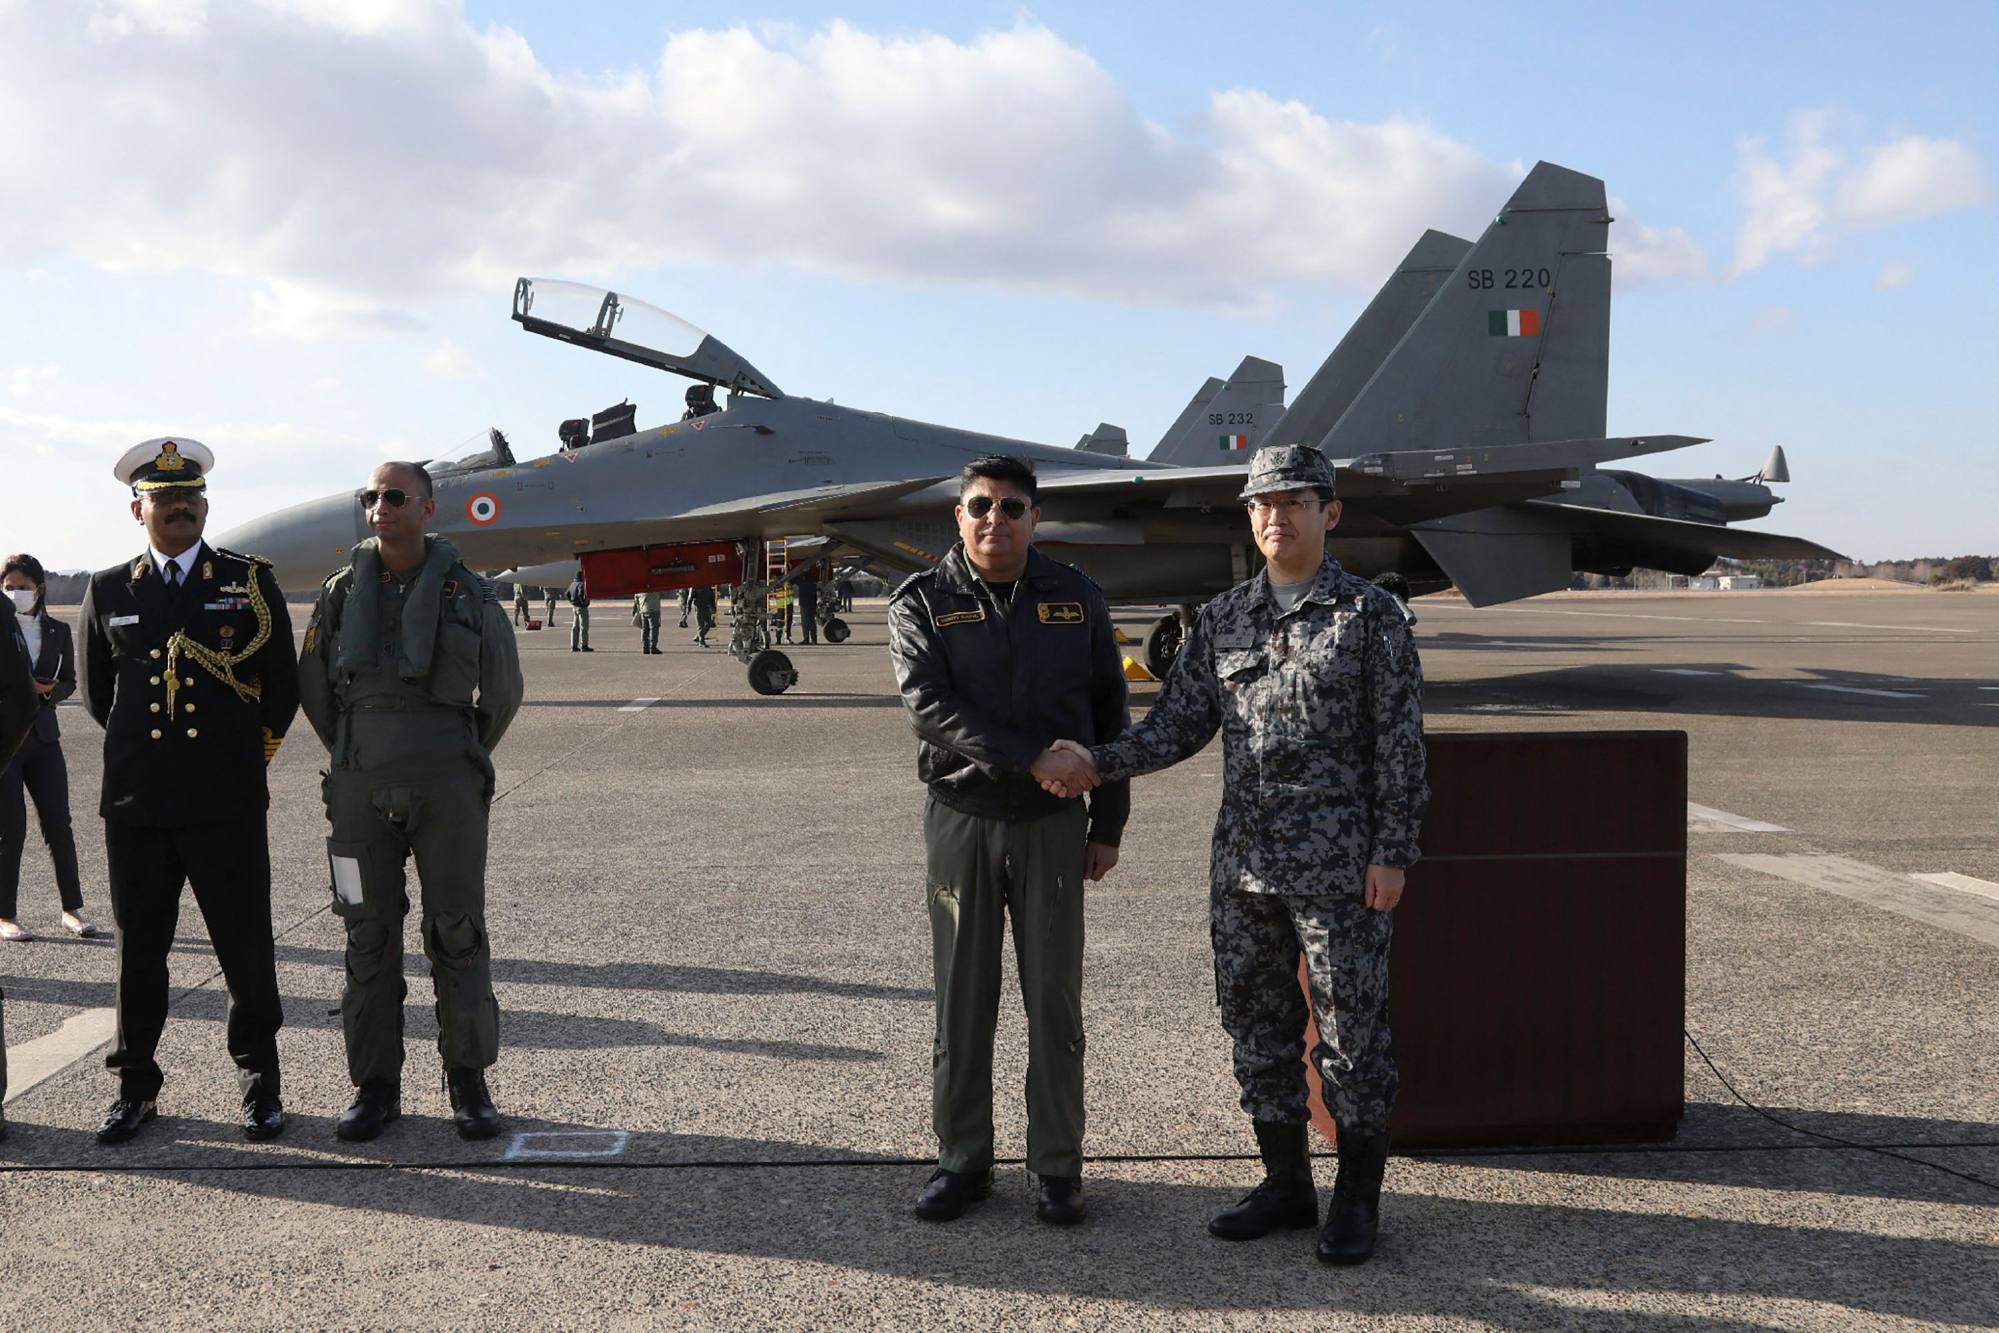 Indian Air Force fighter aircraft at Japan’s Air Self-Defence Force Hyakuri Air Base for the Japan-India joint exercise. Four F-2 and four F-15 fighters taking part. Photo: AFP